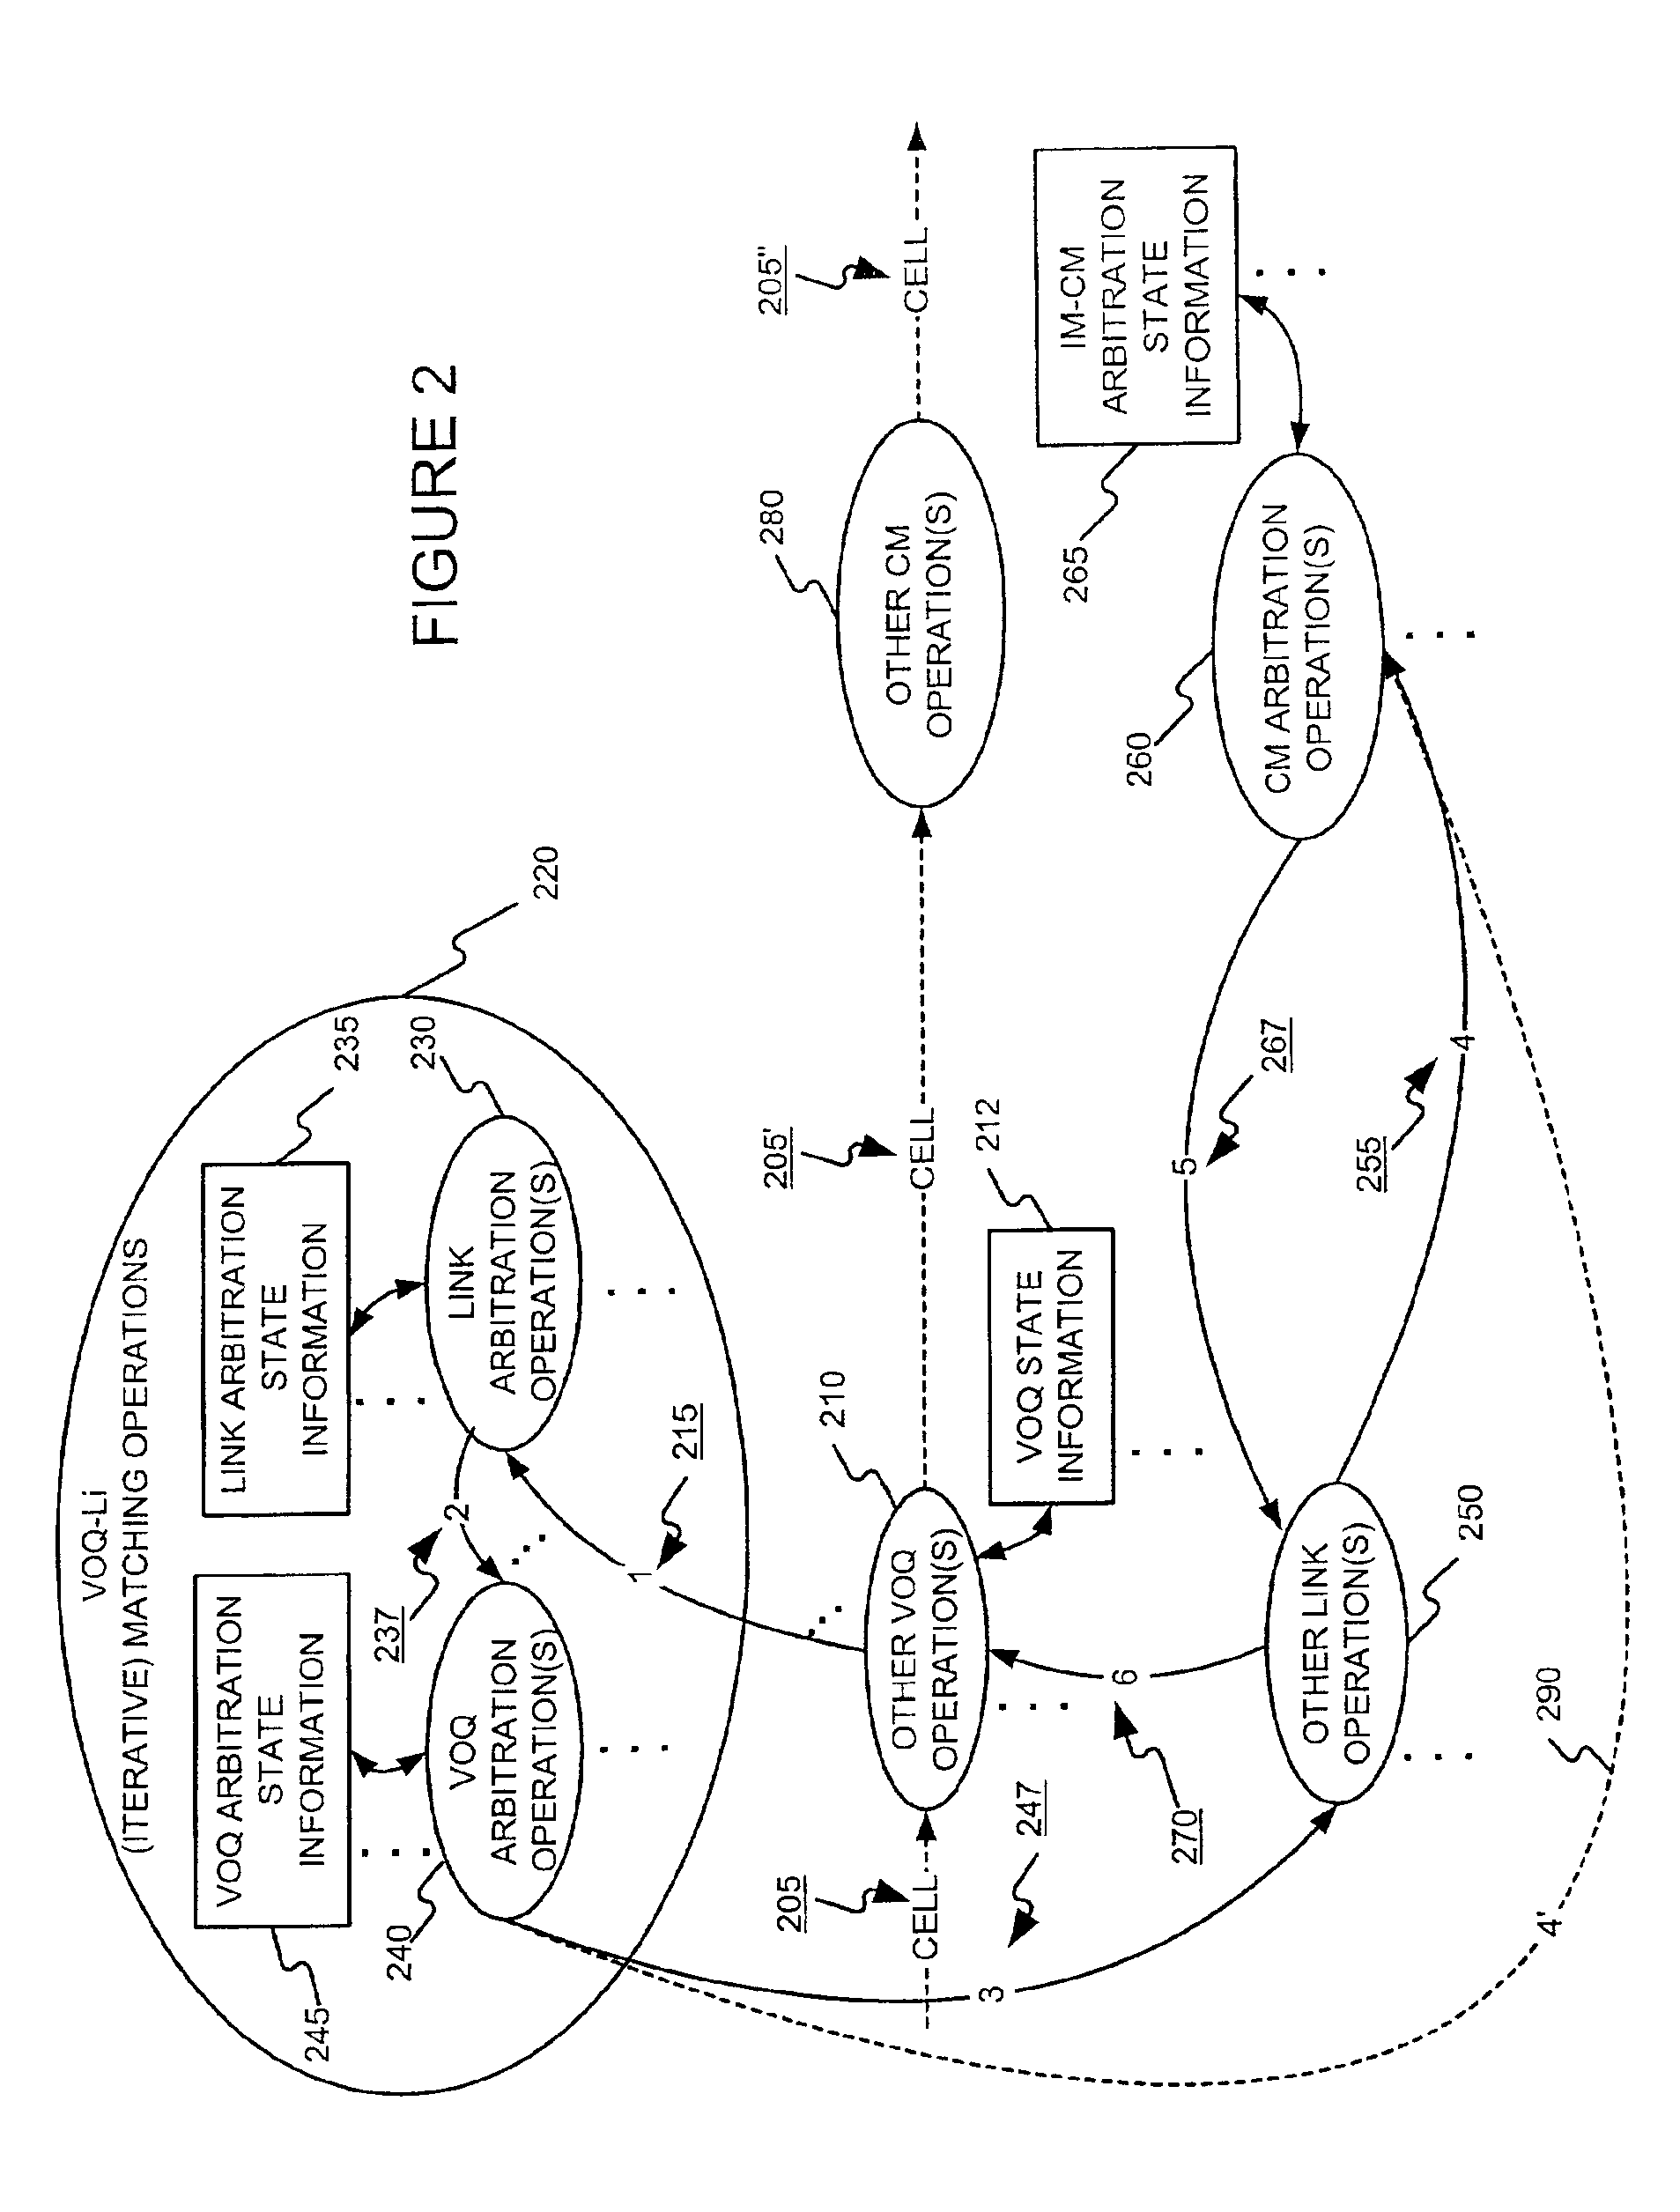 Scheduling the dispatch of cells in non-empty virtual output queues of multistage switches using a pipelined arbitration scheme